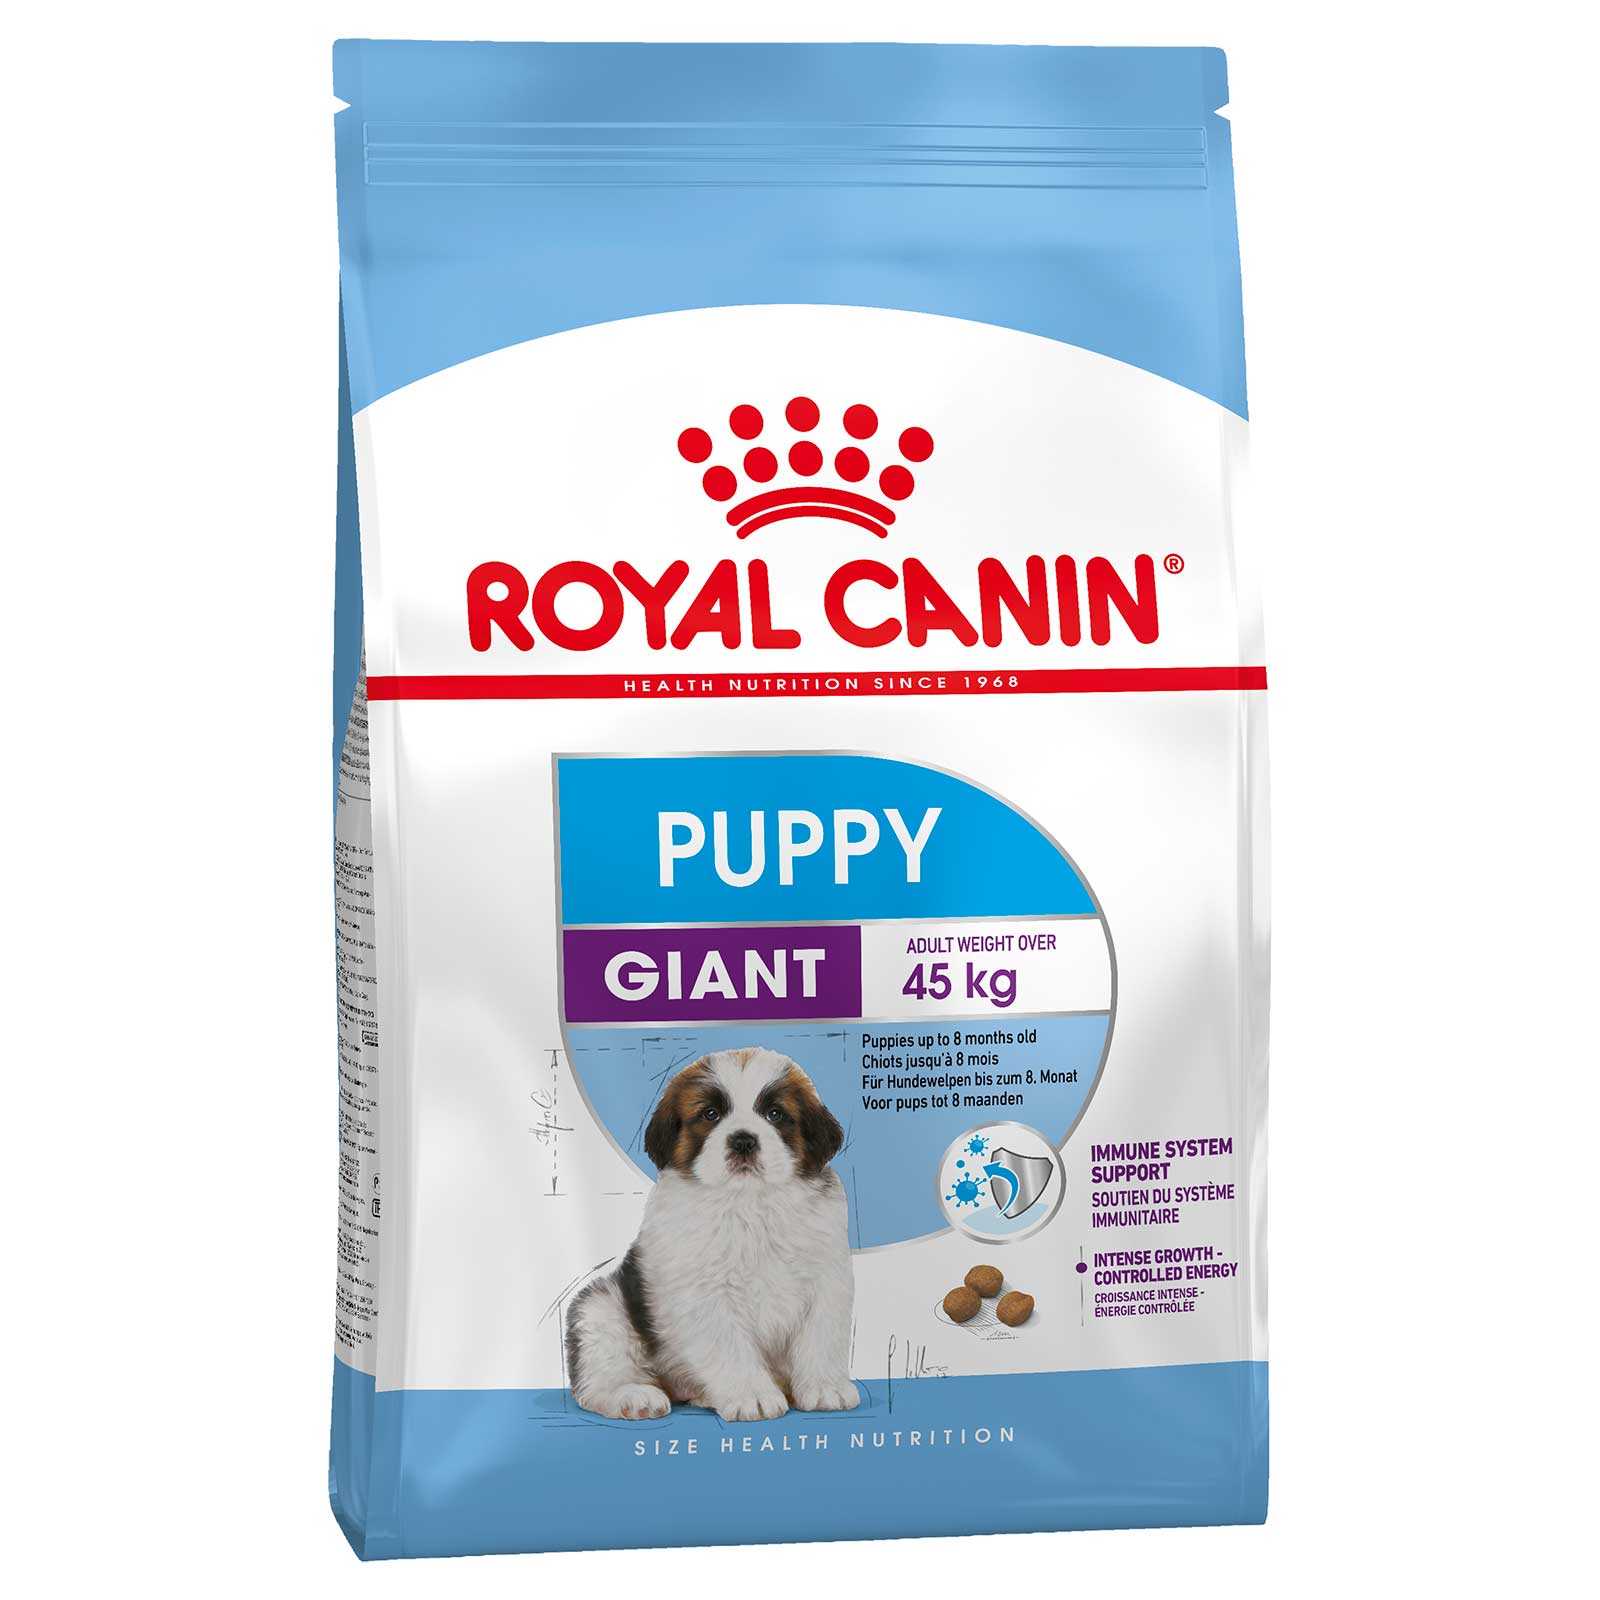 Royal Canin Dog Food Puppy Giant